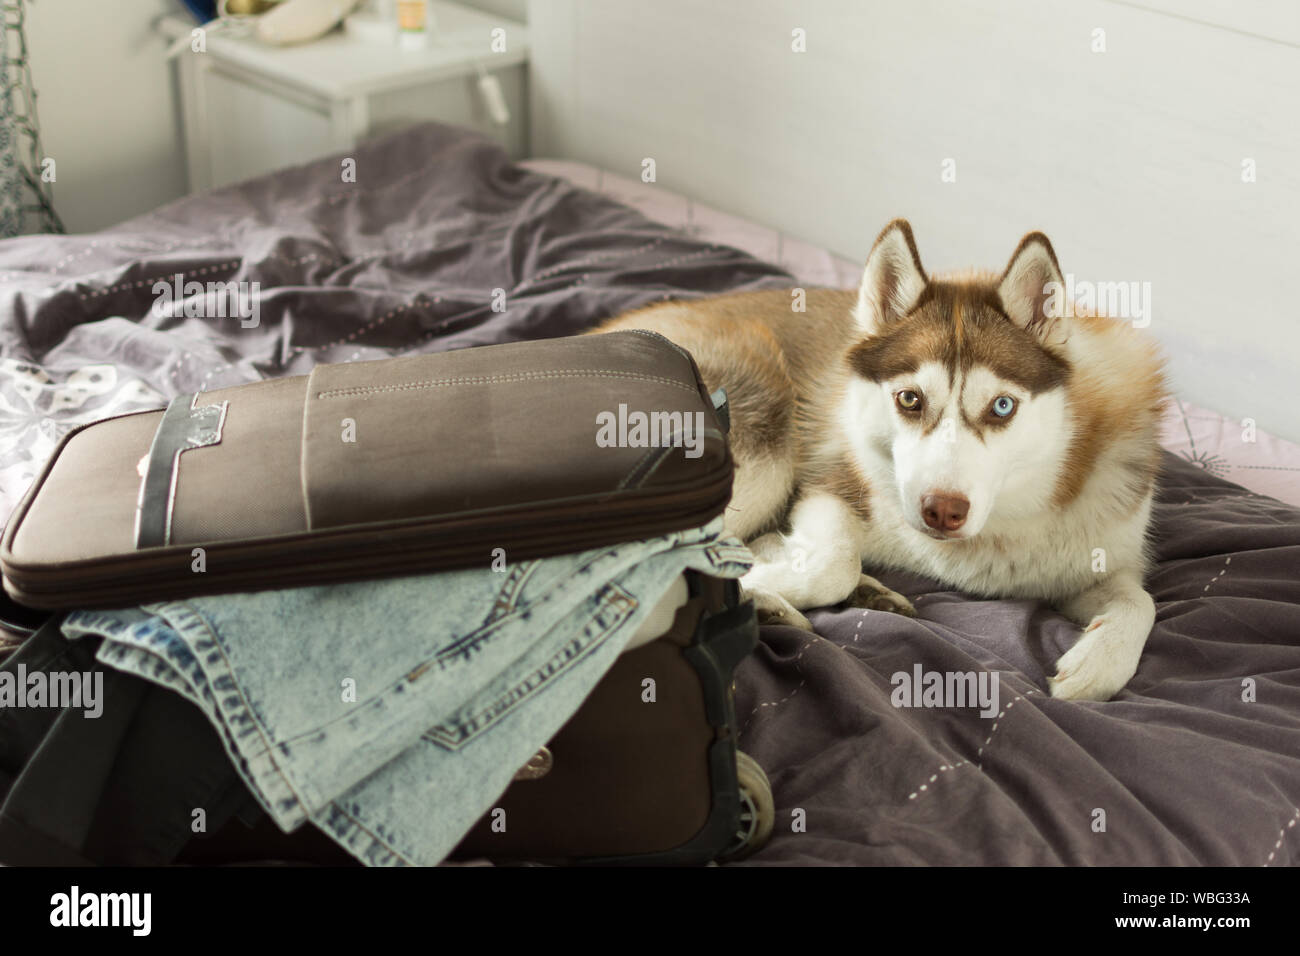 Husky dog is sitting on top of the bed with suitcase. Sweet husky dog ready to go on a trip. Petfriendly destinations. Travel with dog concept. Stock Photo